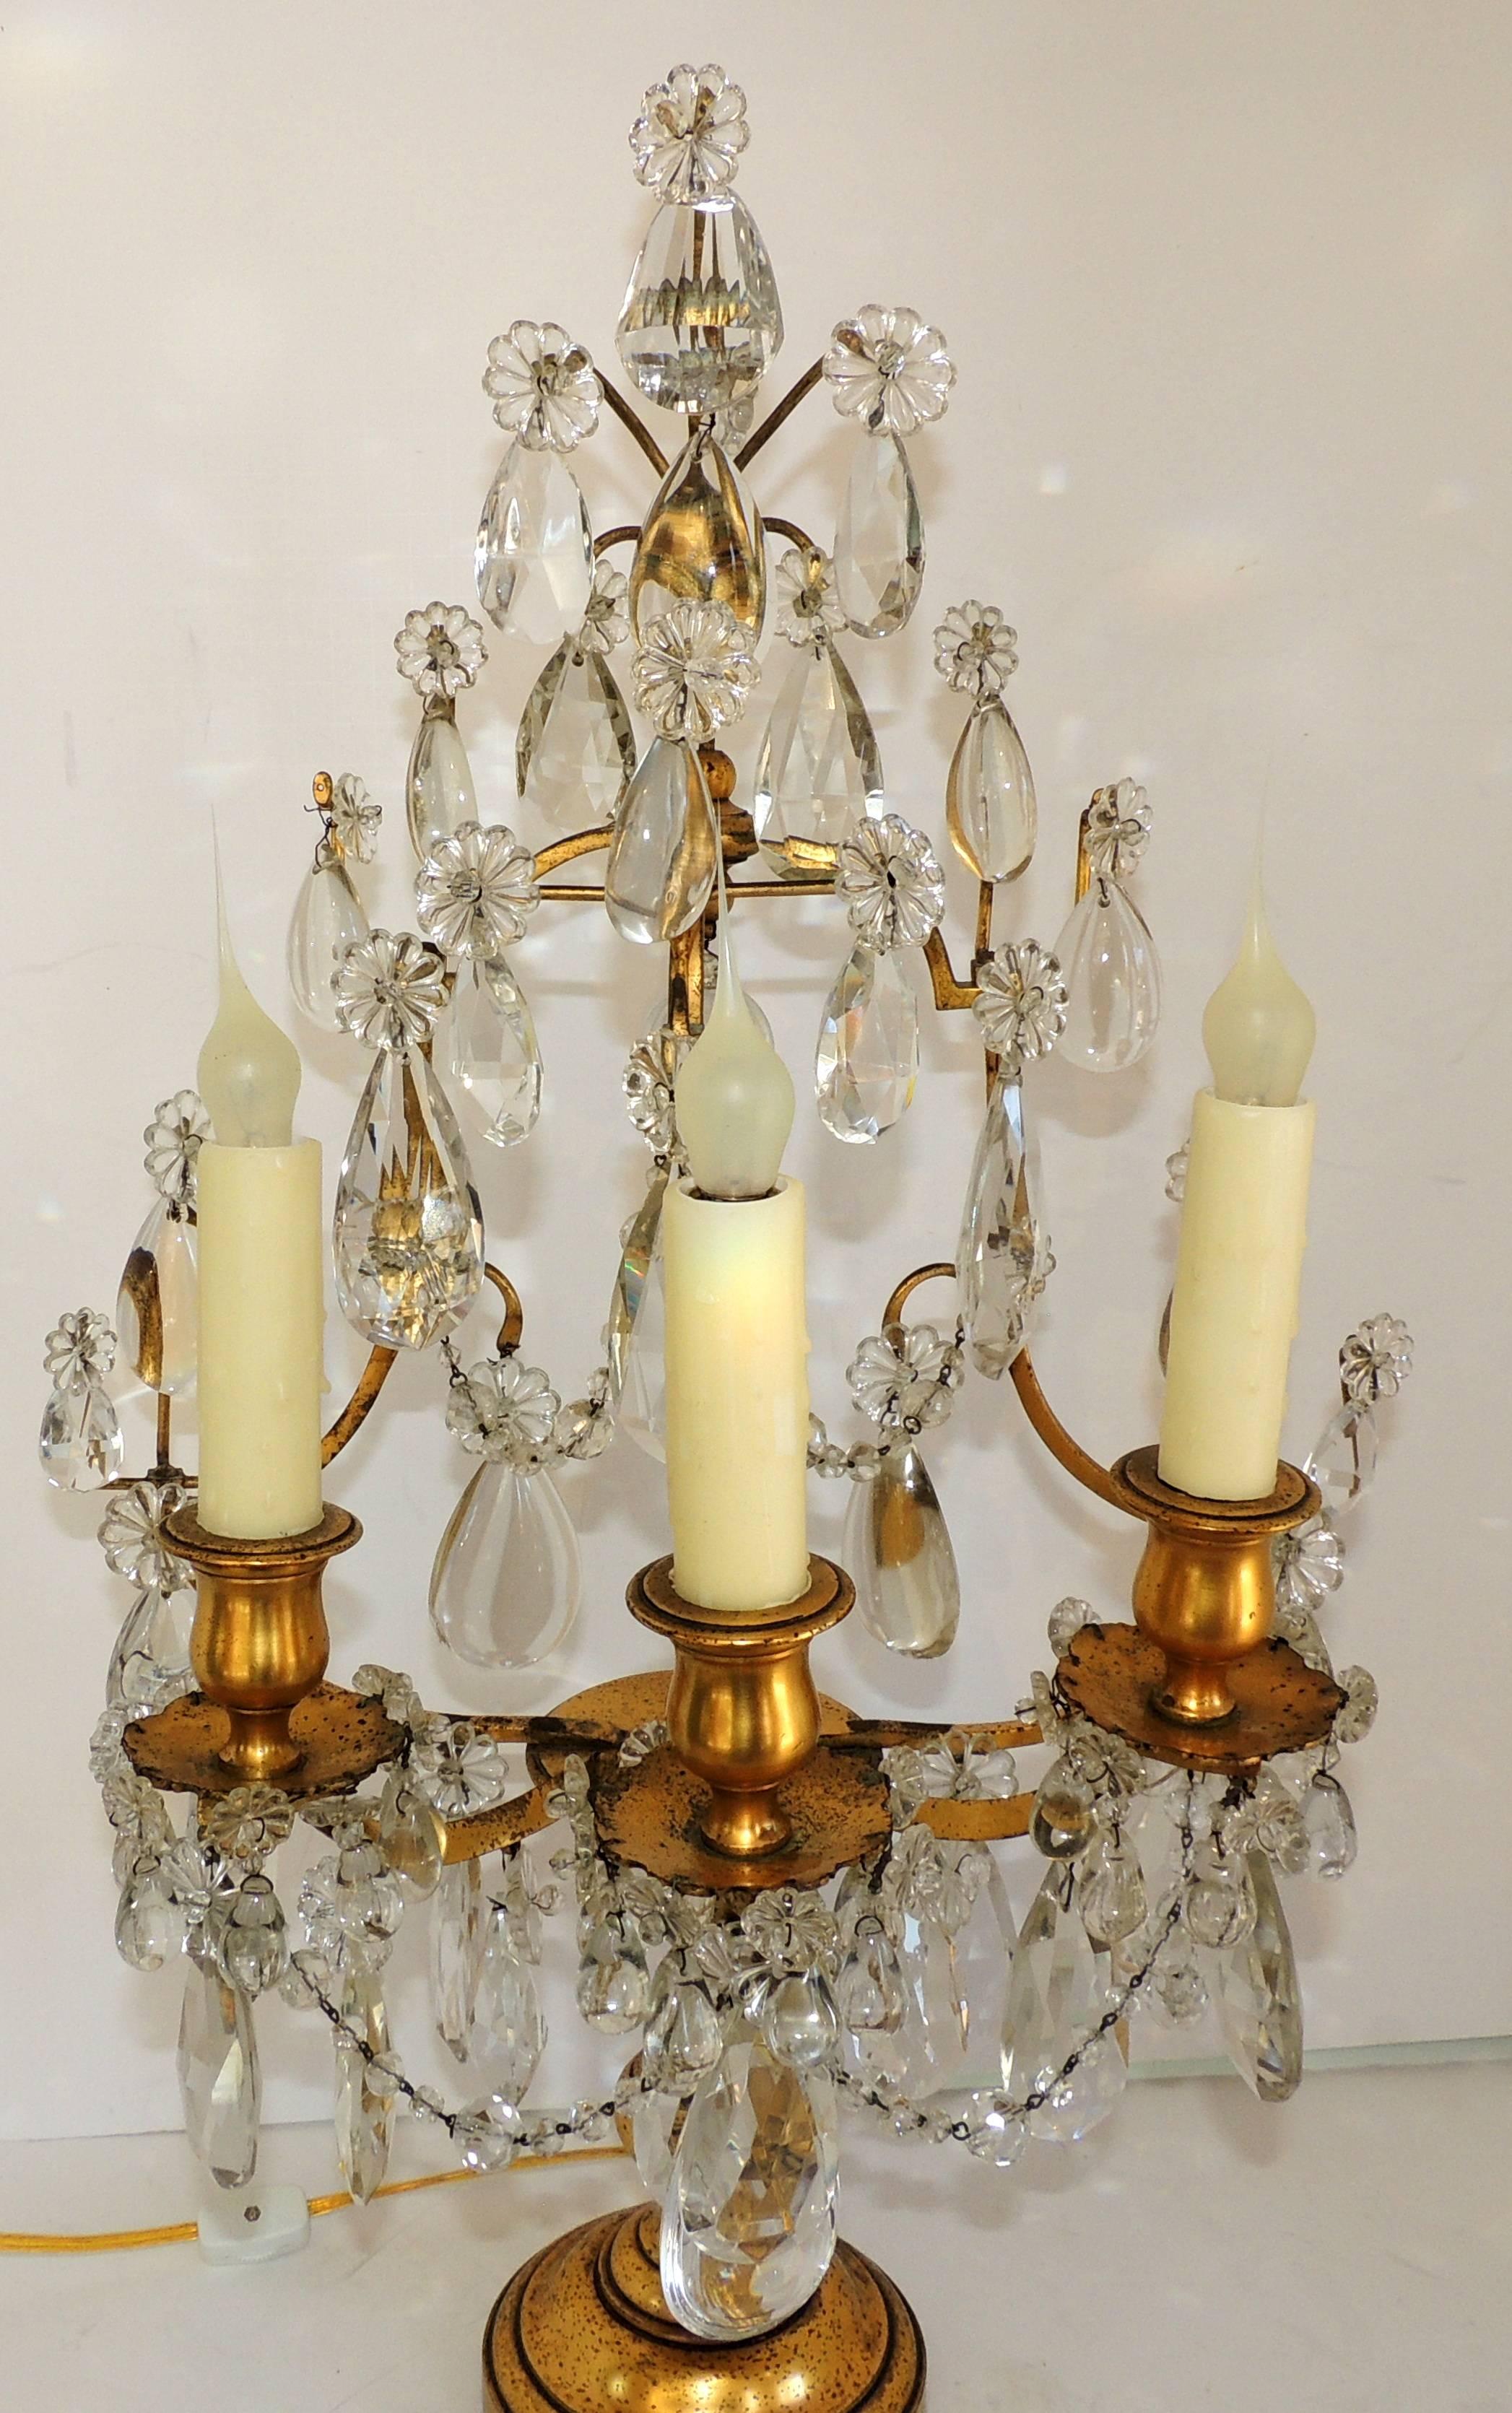 Pair of French Doré Bronze Crystal Girandoles Candelabras Three-Light Lamps For Sale 2